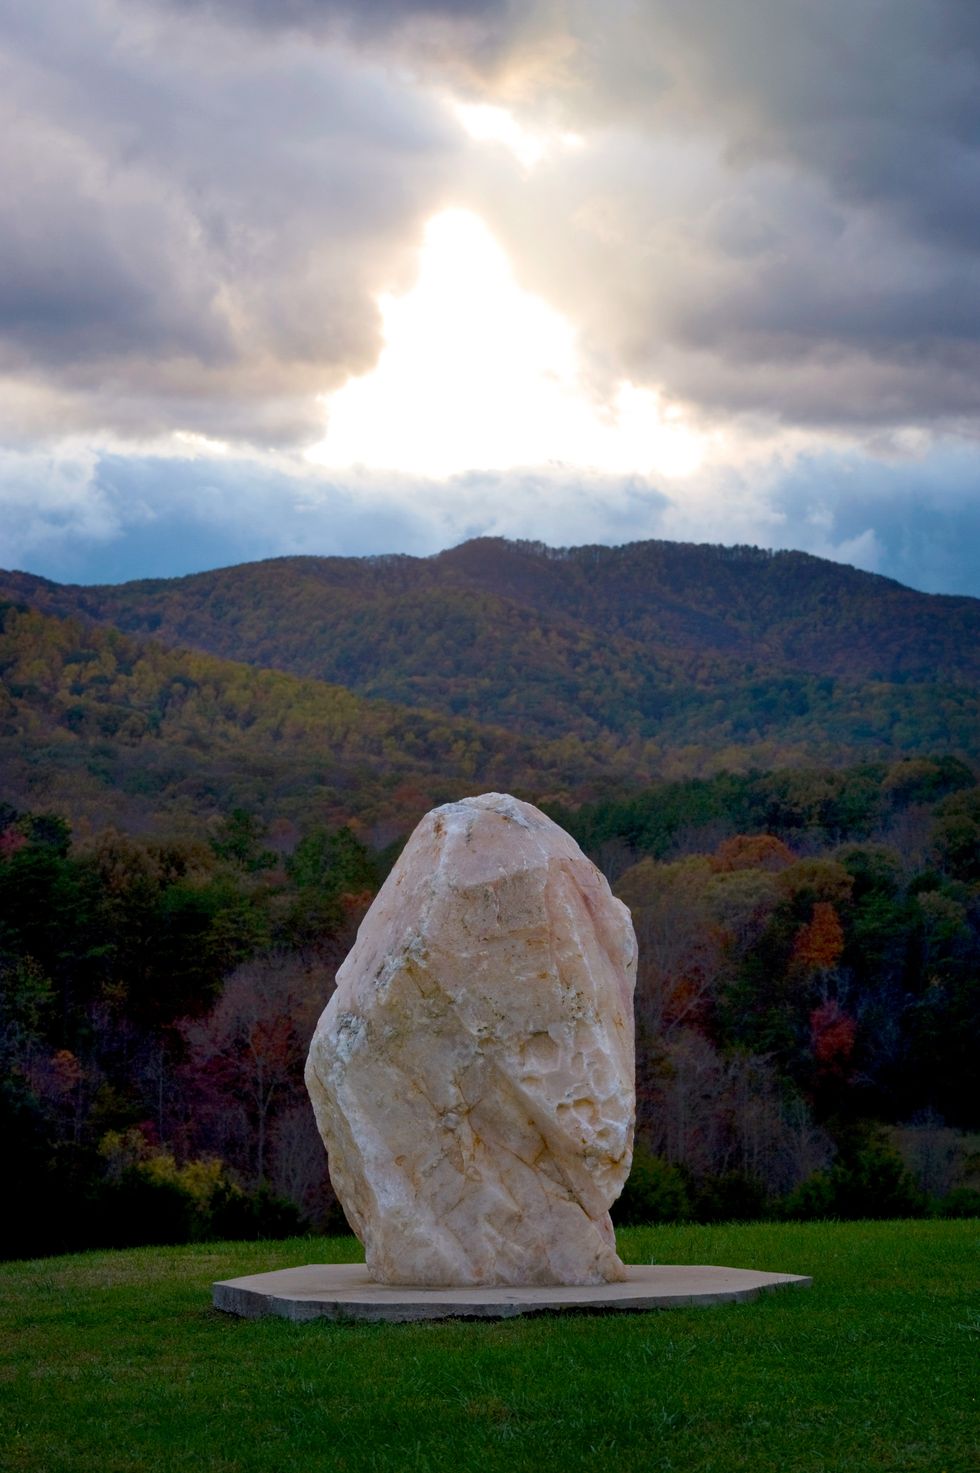 a large quartz crystal on the lawn of the monroe institute in faber va quartz is considered by some to have energy properties